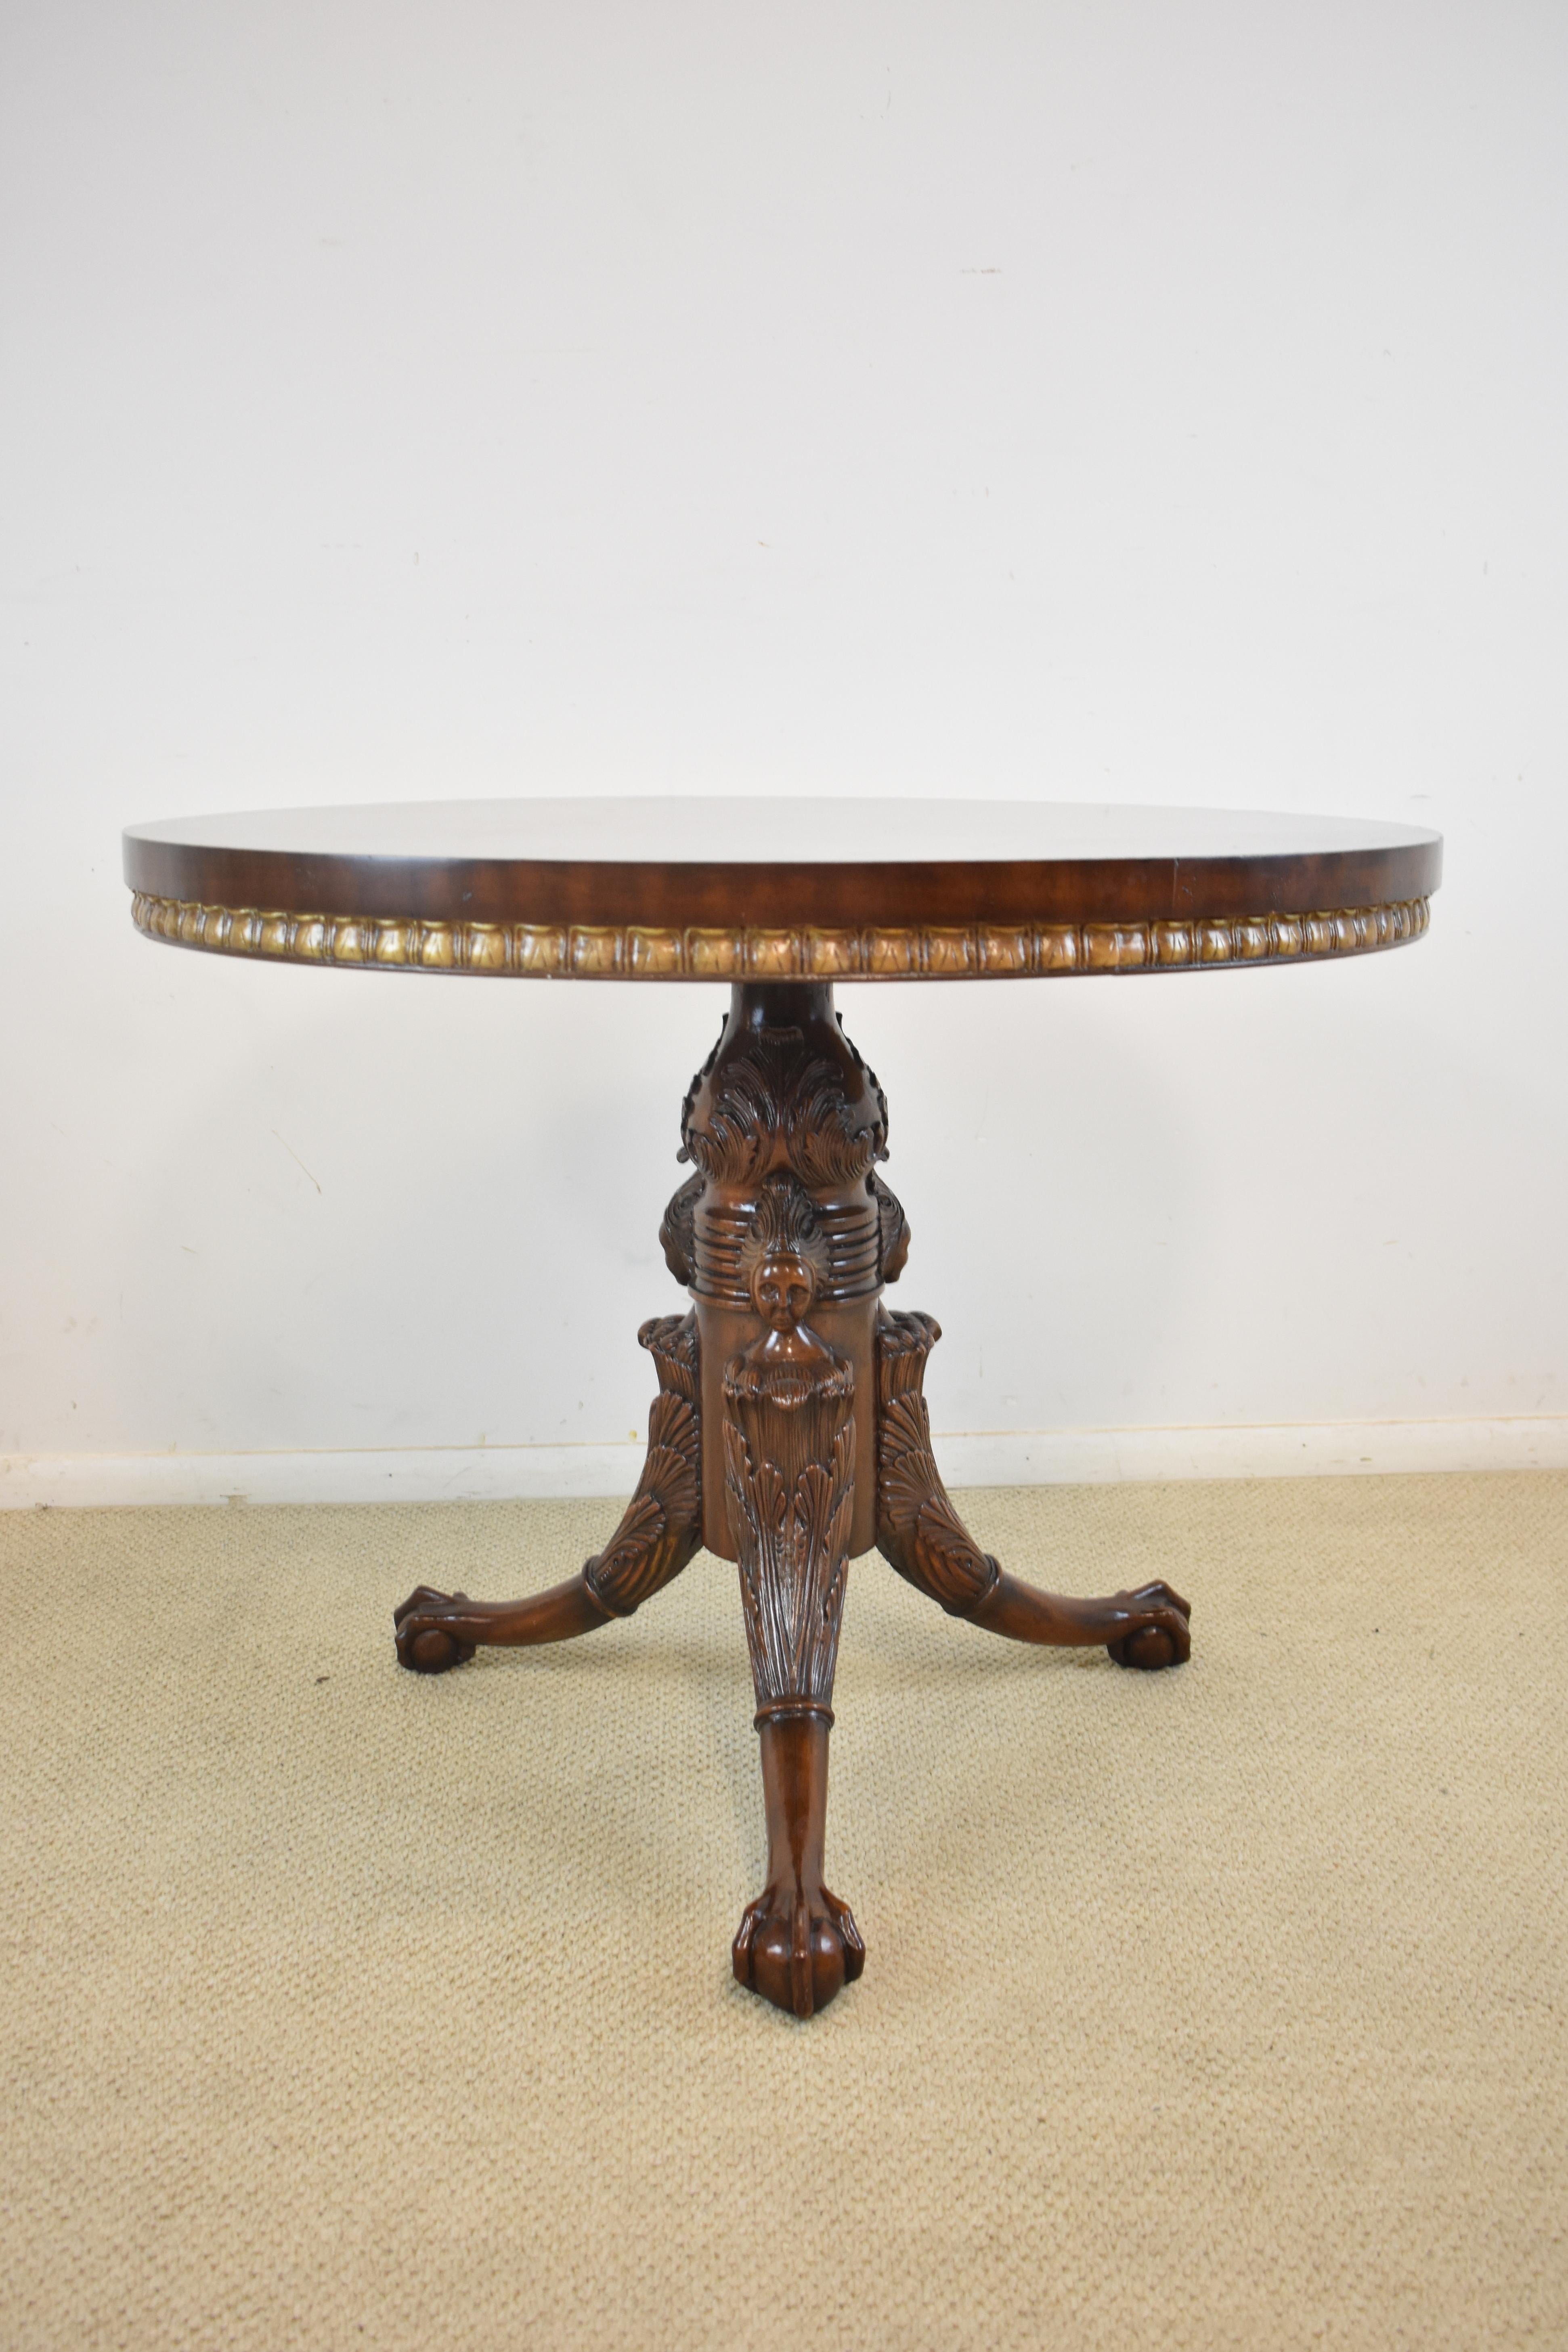 An elegant round centre table by Maitland Smith. Mahogany with a hand-carved tripod base that features female figures and ball and claw feet. The round burled top has a gold gilt banding around the edge. This table is in beautiful condition.